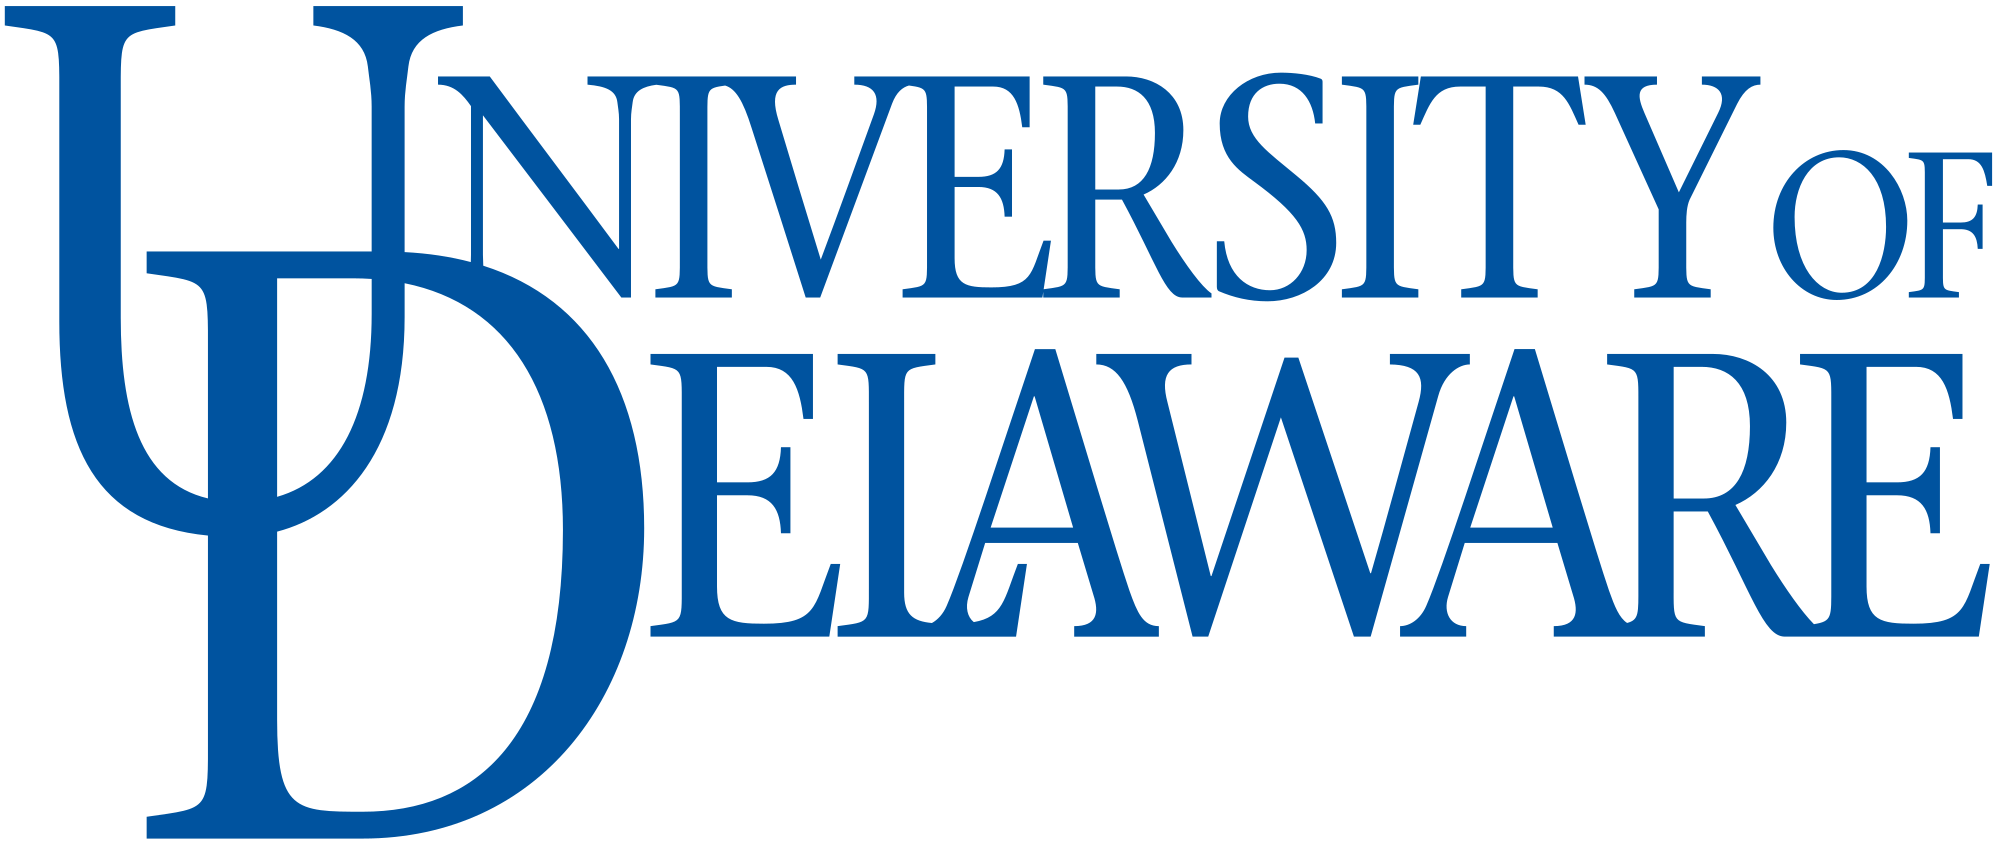 University of Delaware Rankings, Tuition, Acceptance Rate, etc.